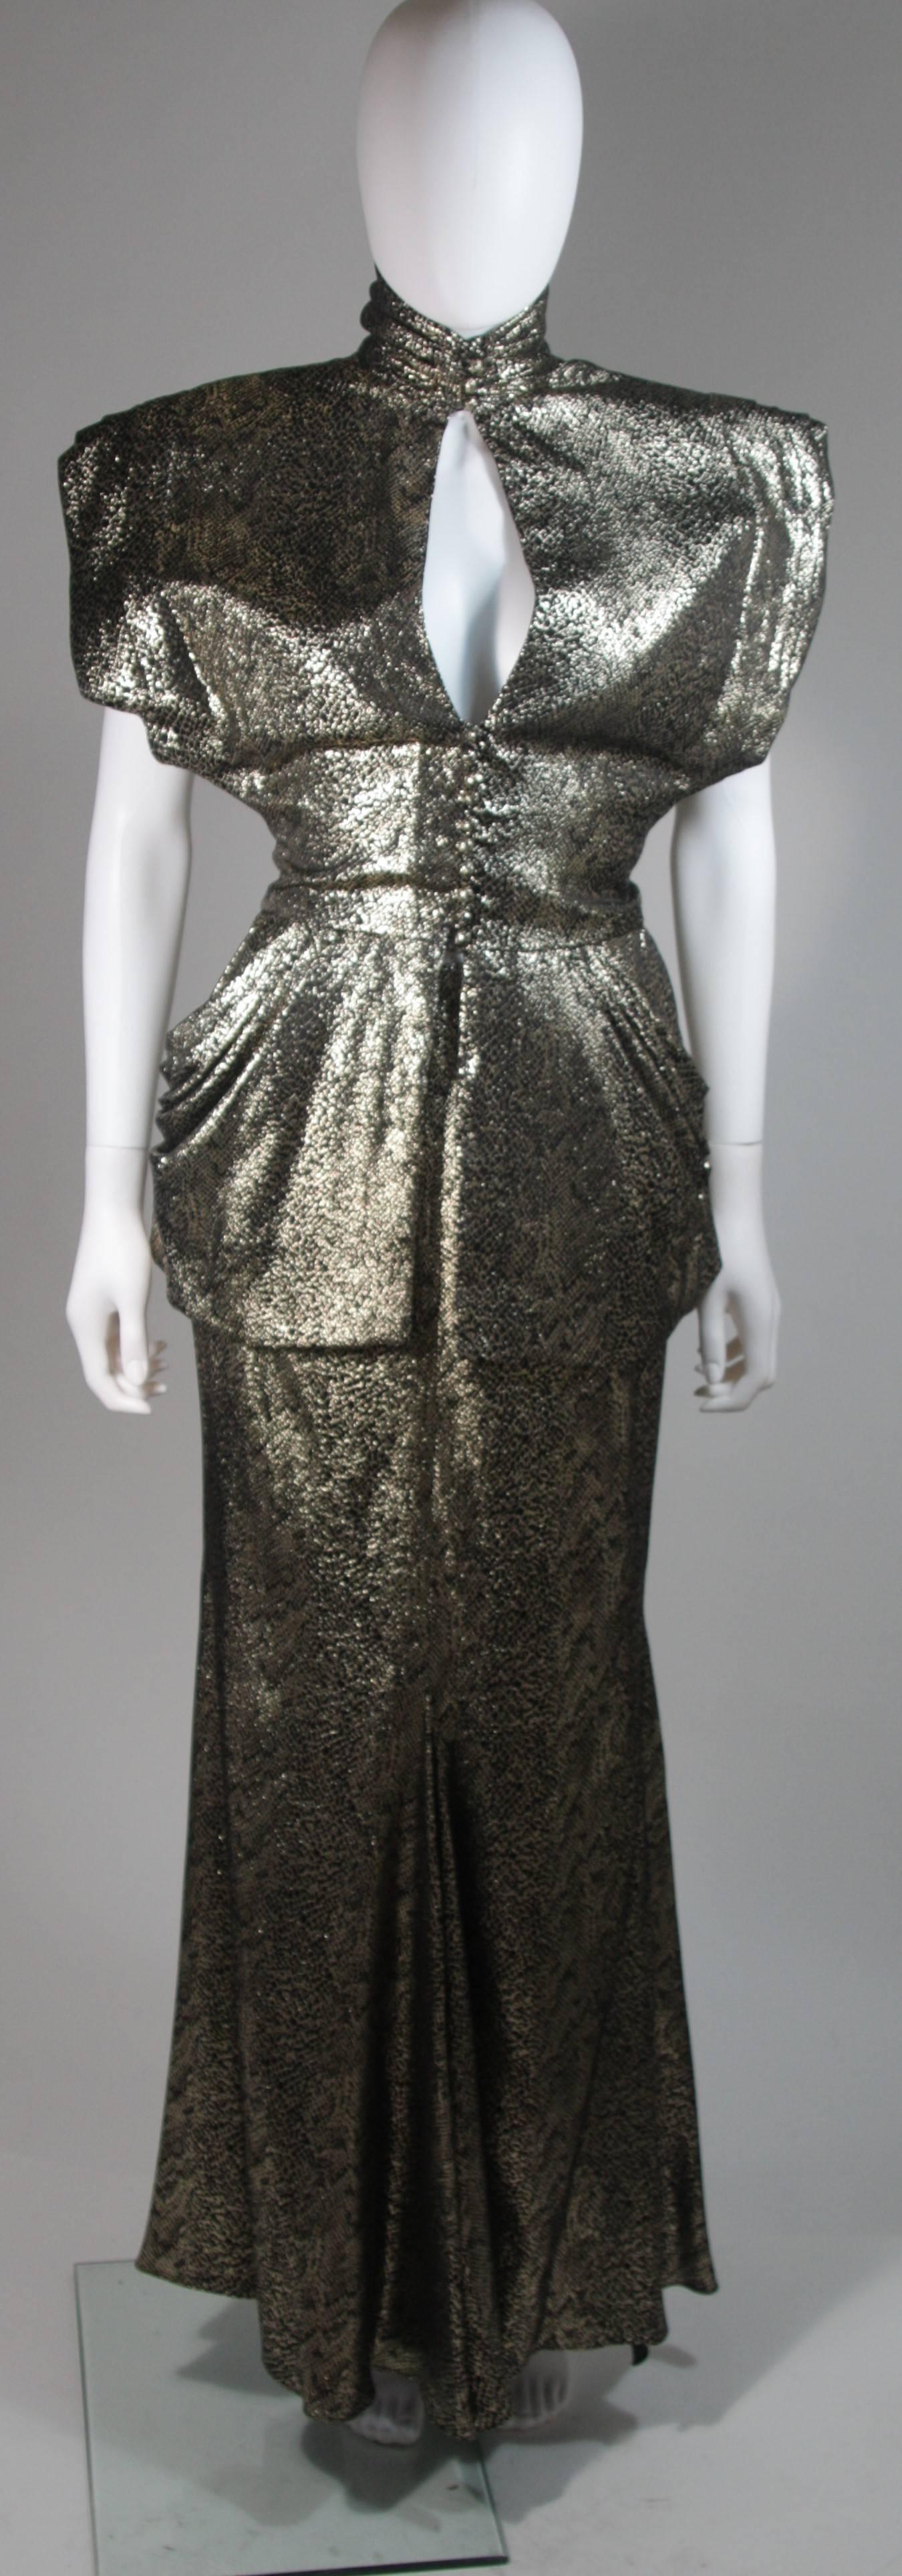 This Vicky Tiel ensemble is composed of a black silk with metallic snake print. The structured top features shoulder pads and an open center front keyhole with button closures. The skirt has a zipper closure. In excellent vintage condition.